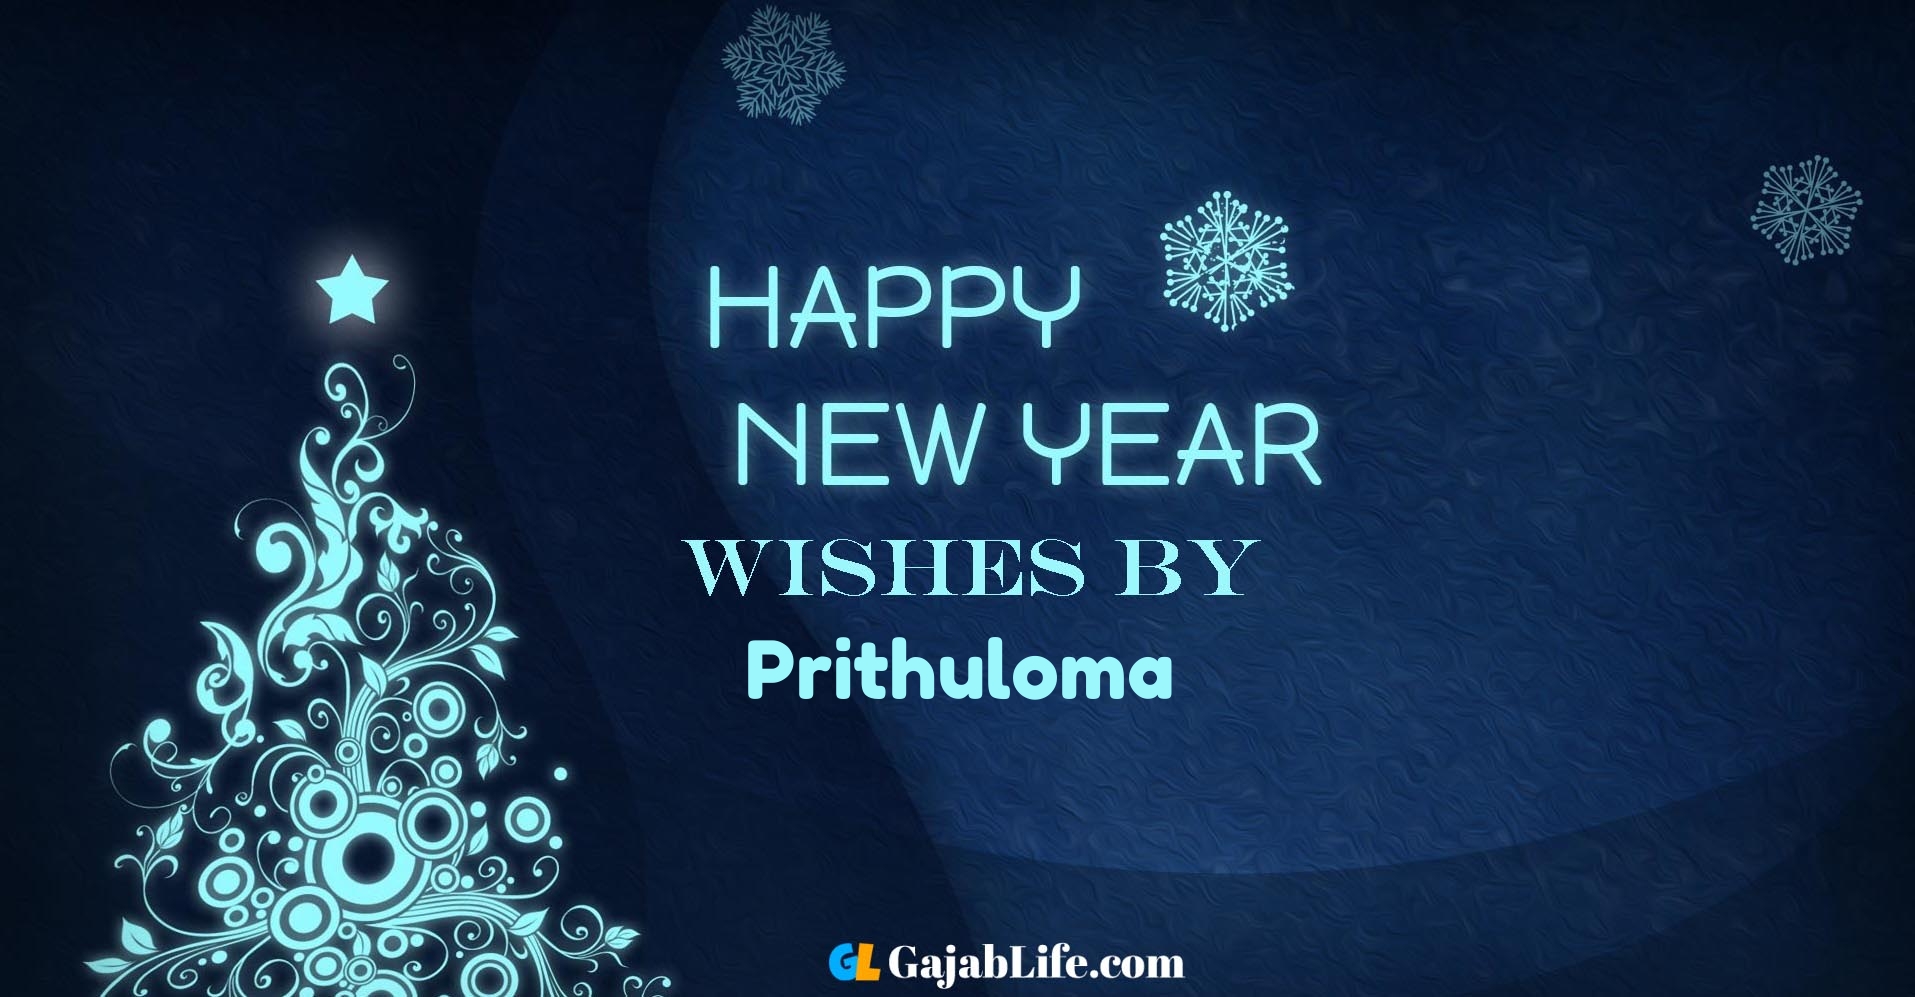 Happy new year wishes prithuloma